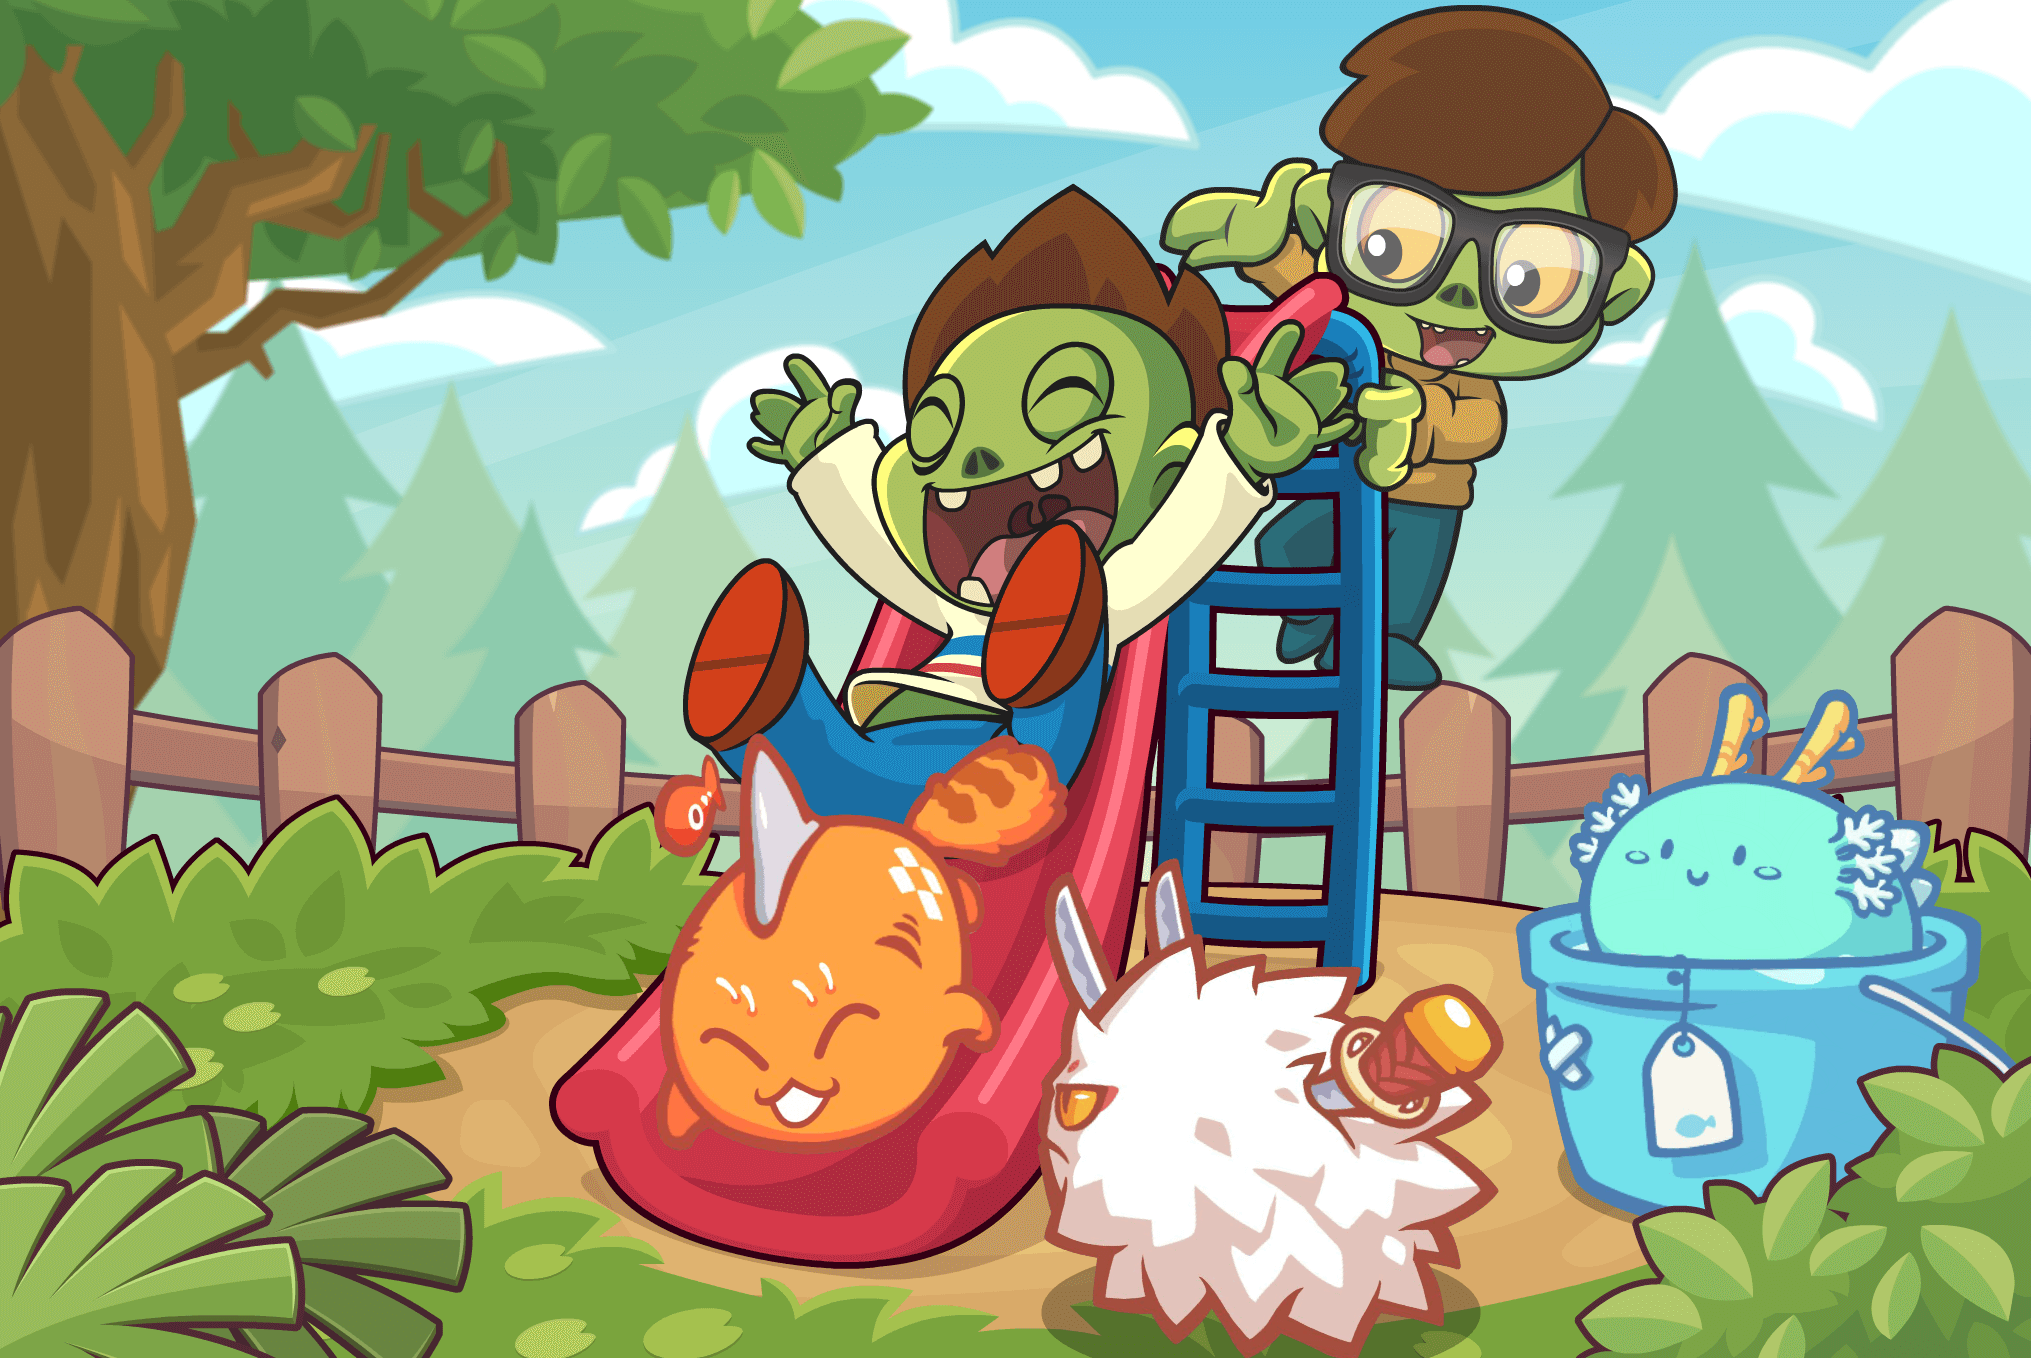 Axie Infinity: Origin Season 0 Hits the Scene! Here's What That Means